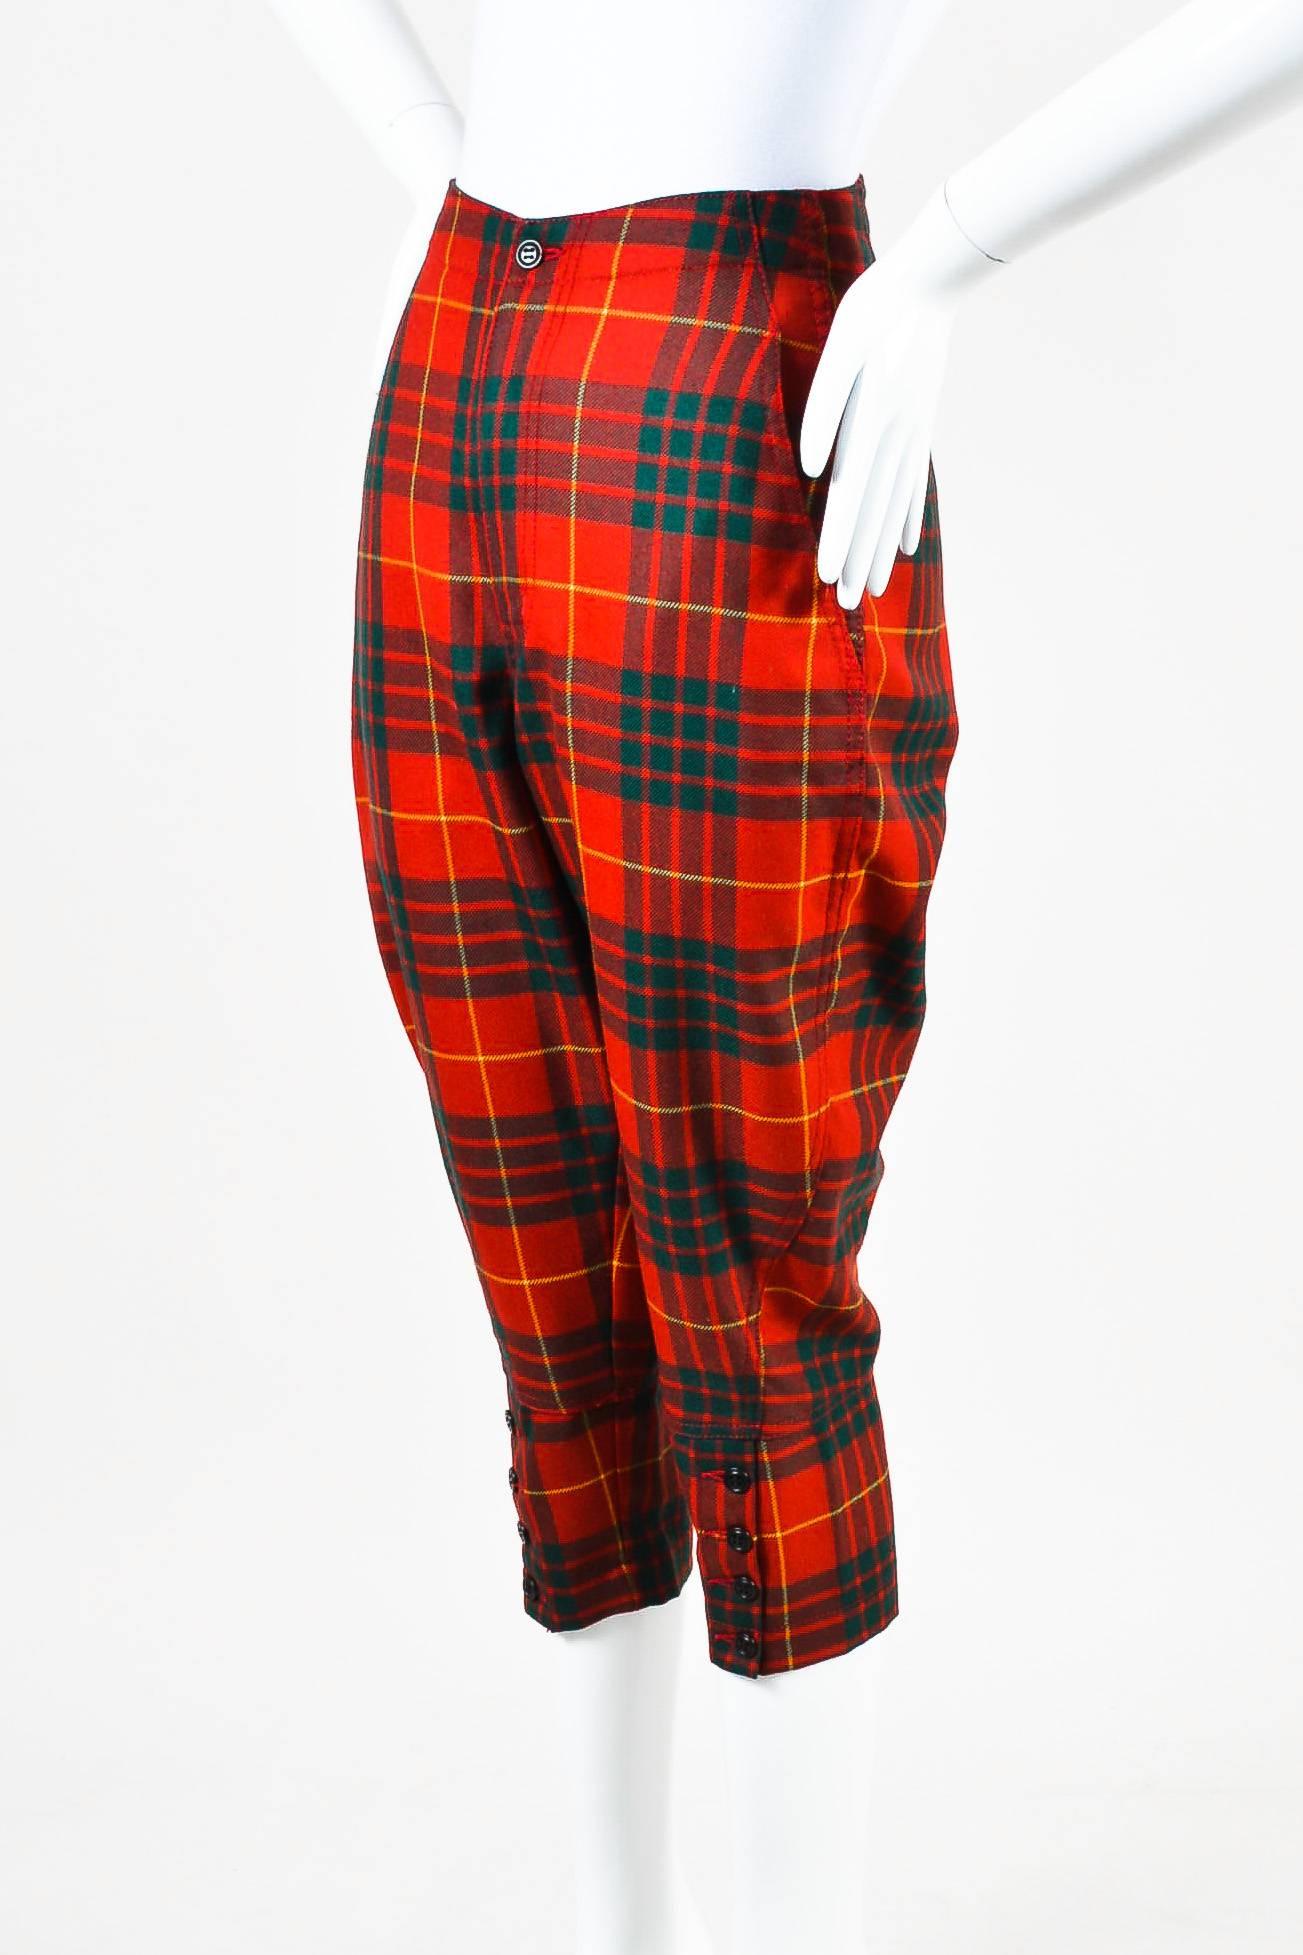 Red, green, and yellow plaid print capri pants. Constructed of wool. Angled pockets. Center-fly fastening.

Measurements
Waist: 28"
Hips: 34.5"
Inseam: 20.5"